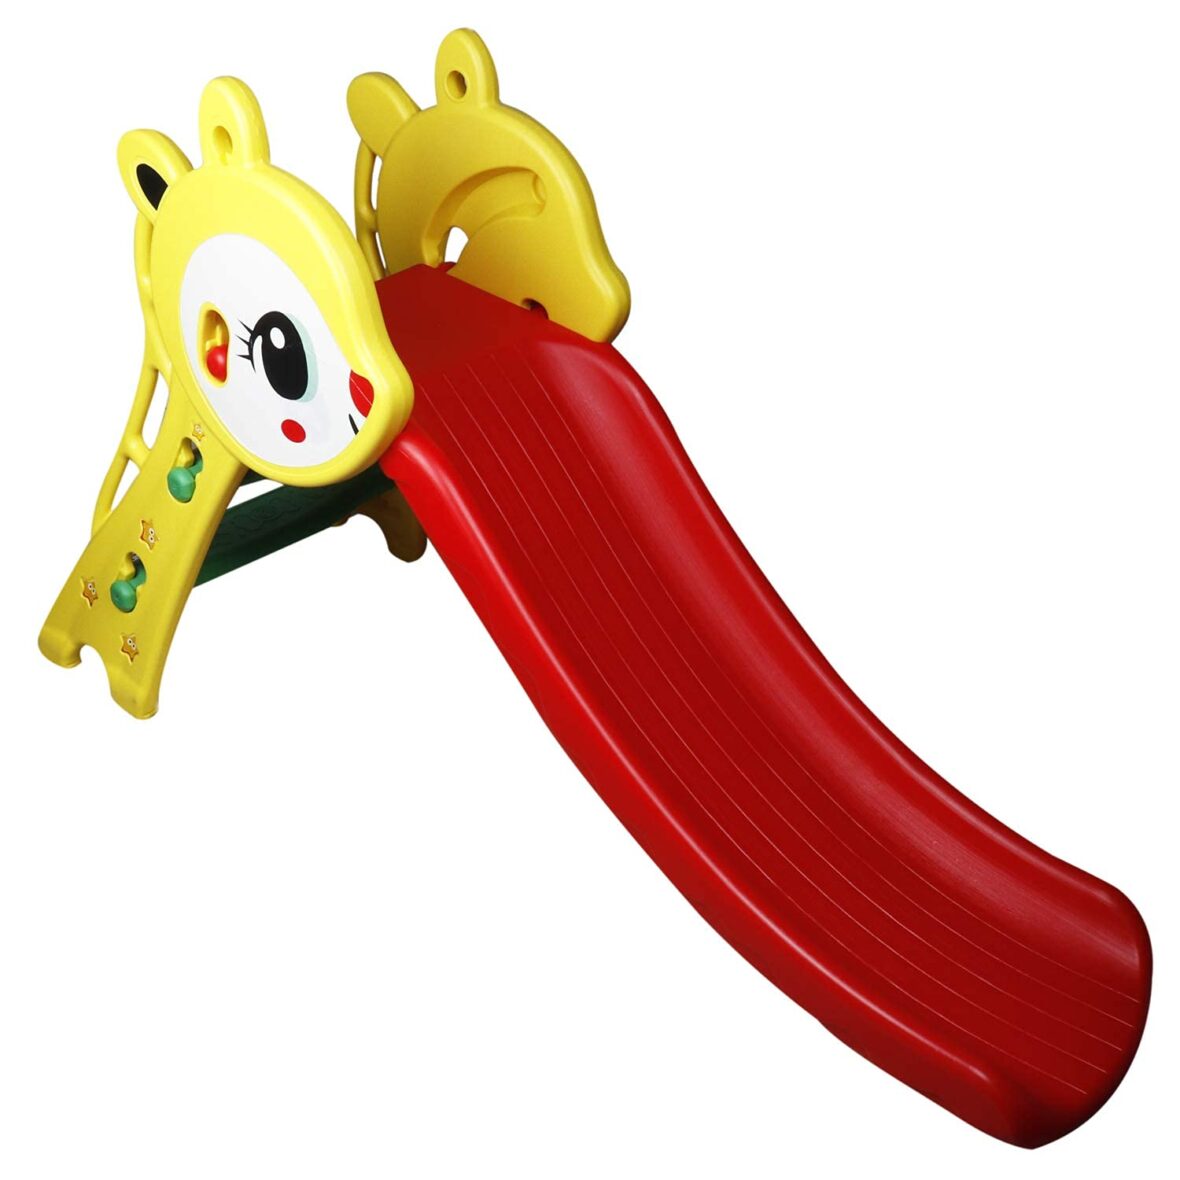 U Smile Playtool Rabbit Slide for Kids Indoor / Out Door and Garden Age -2 to 4 Years L130 x B 50 x H70 cm